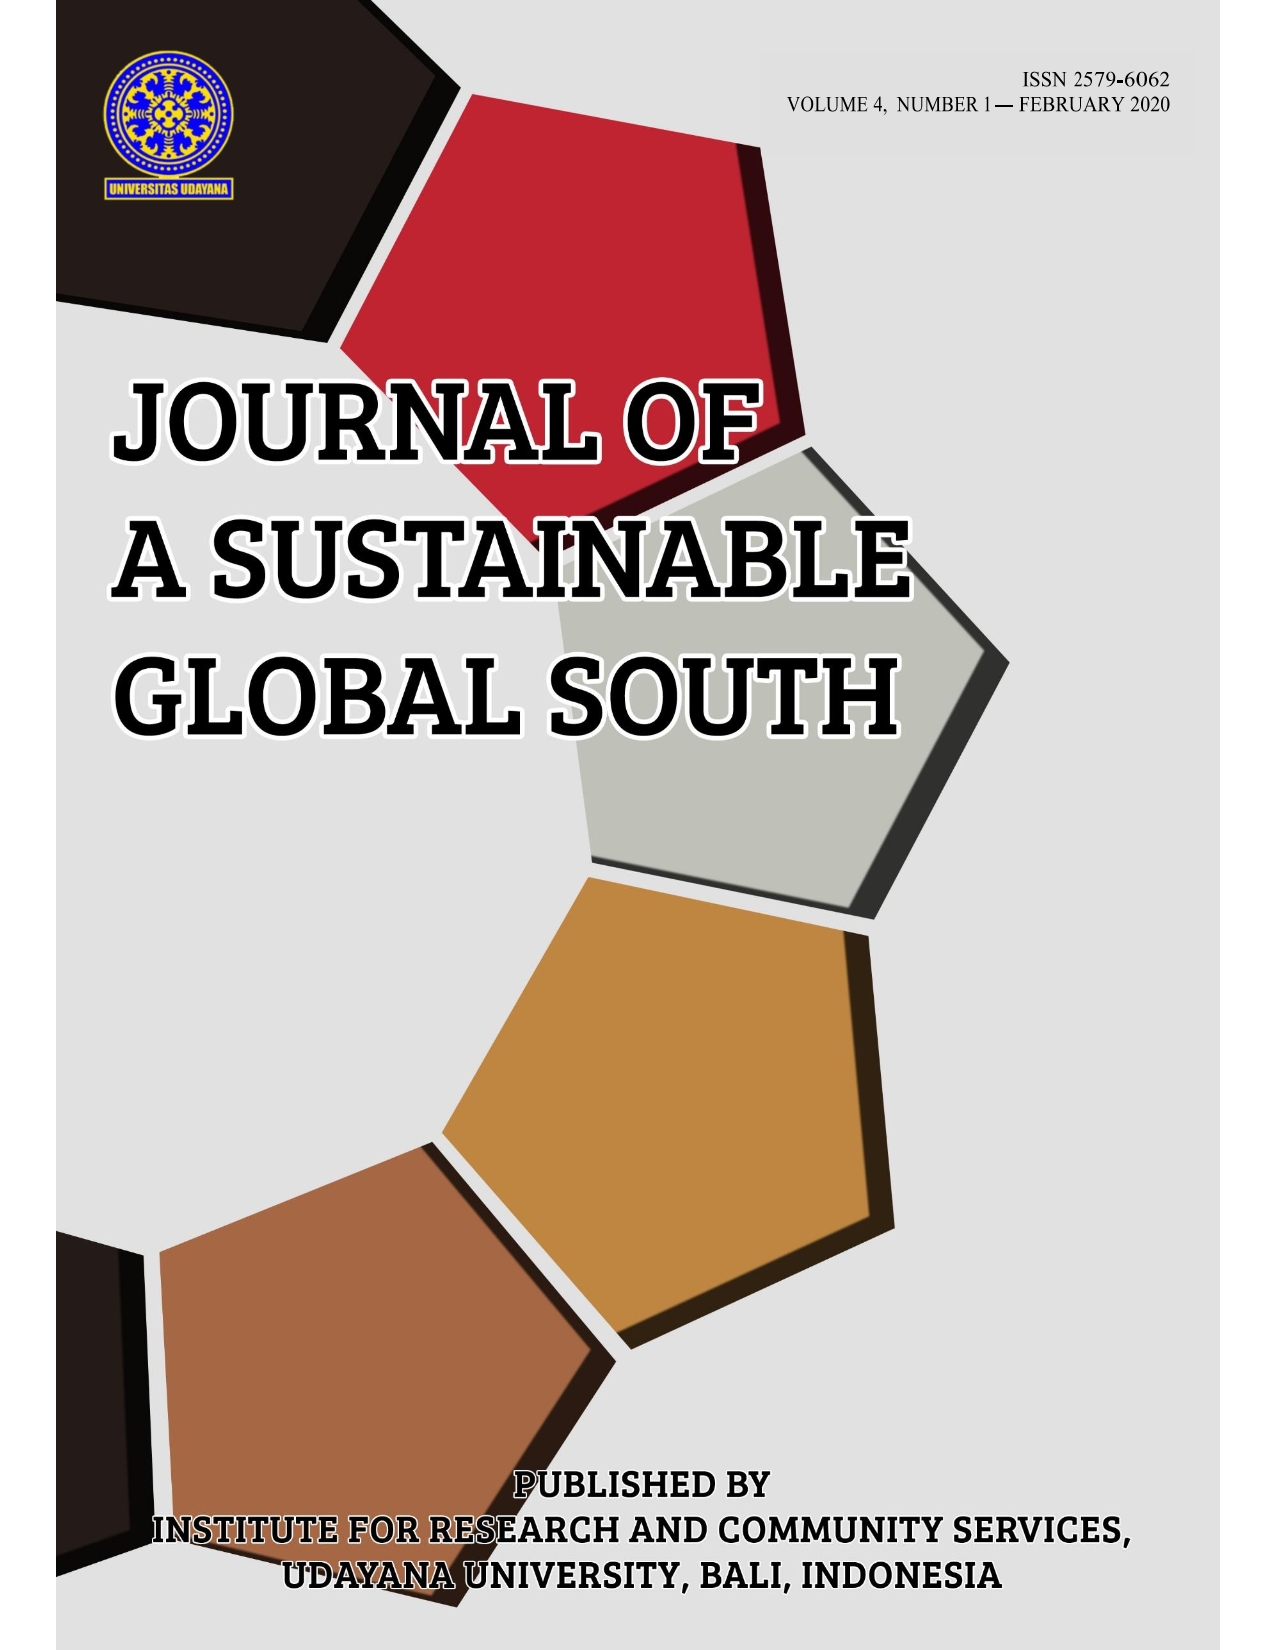 Journal of Sustainable Global South (JSGS) Udayana University